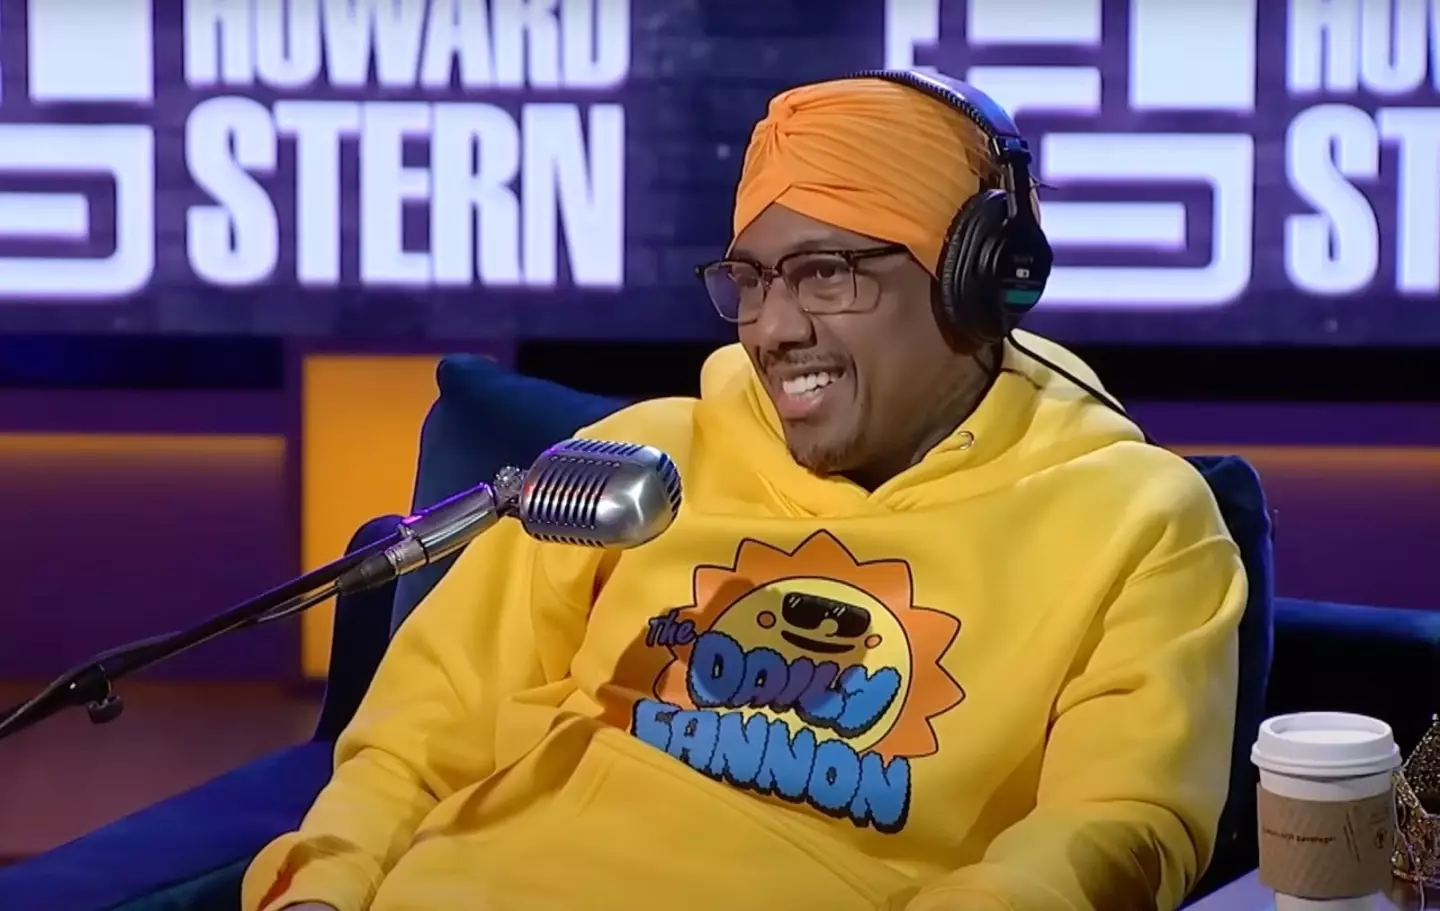 Cannon recently featured on an episode of The Howard Stern Show.